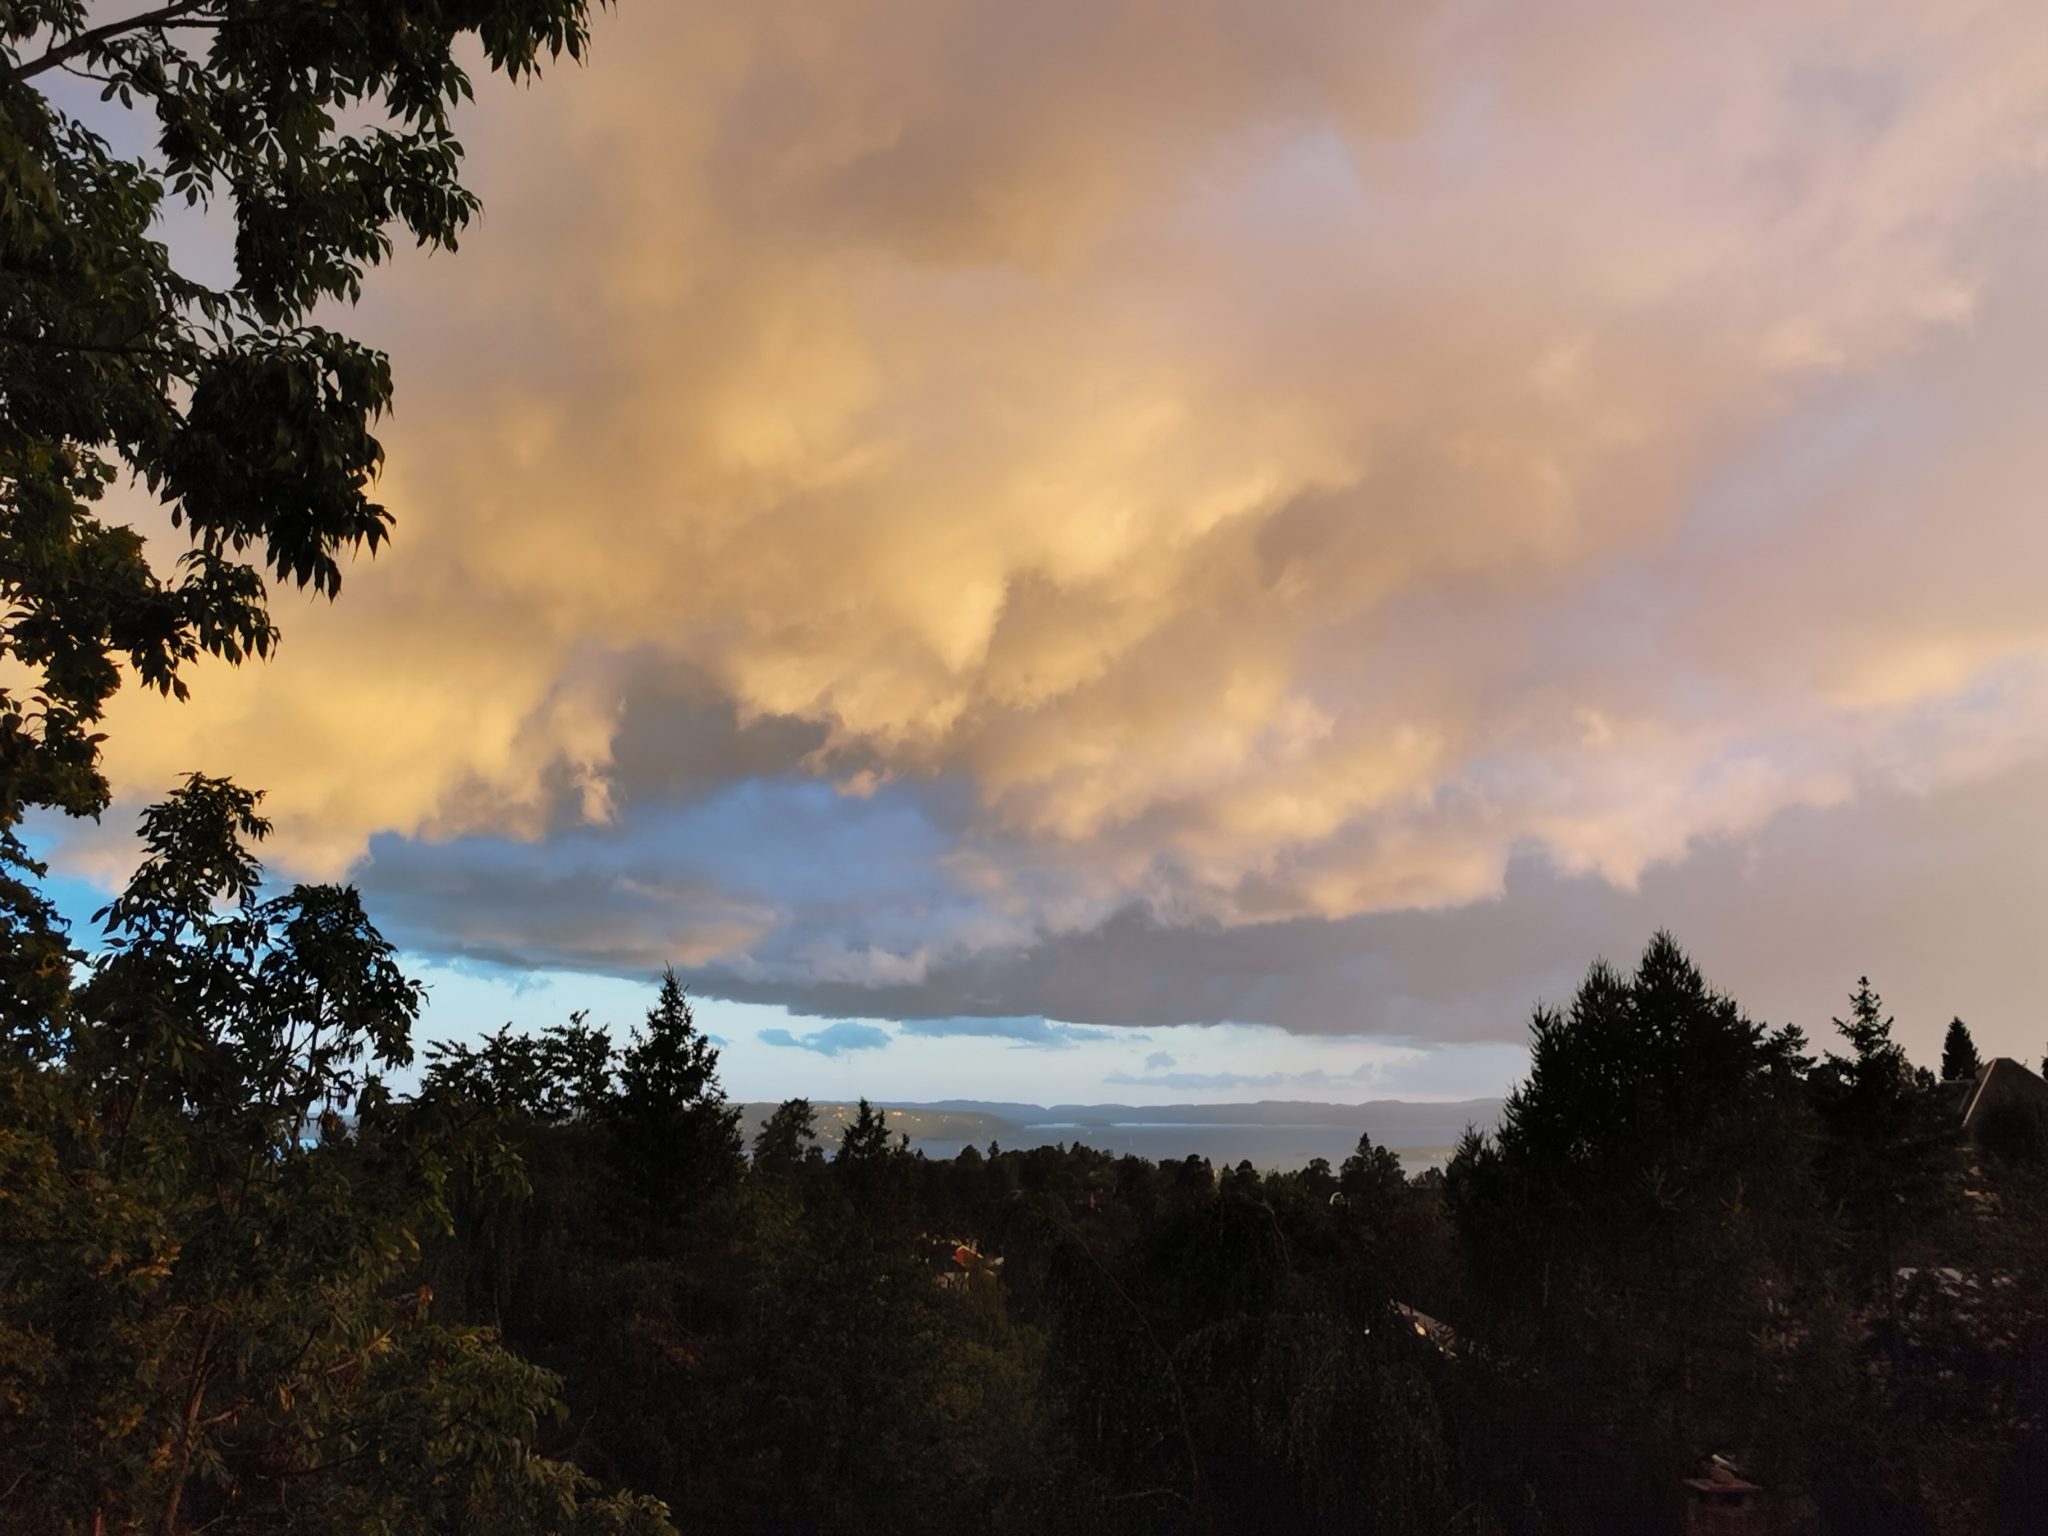 View toward Nesodden outside Oslo Norway at the end of a rainfall. WorldPhotographyDay22.